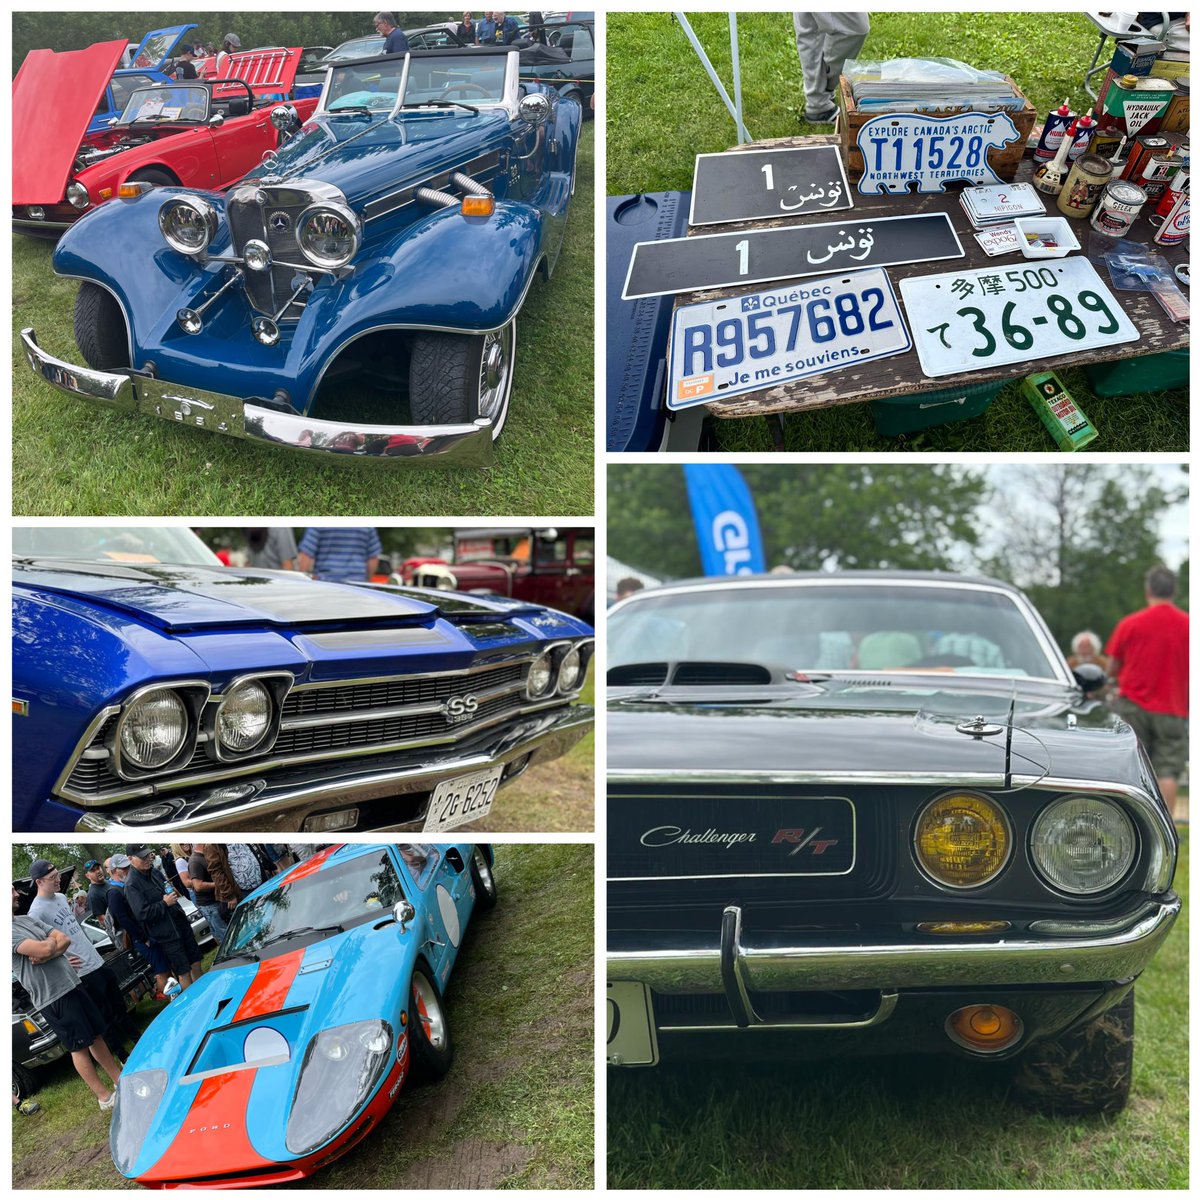 Vintage car expo in Quebec was a blast! 😍 #ClassicCars #AmazingExperience #TouchGrass